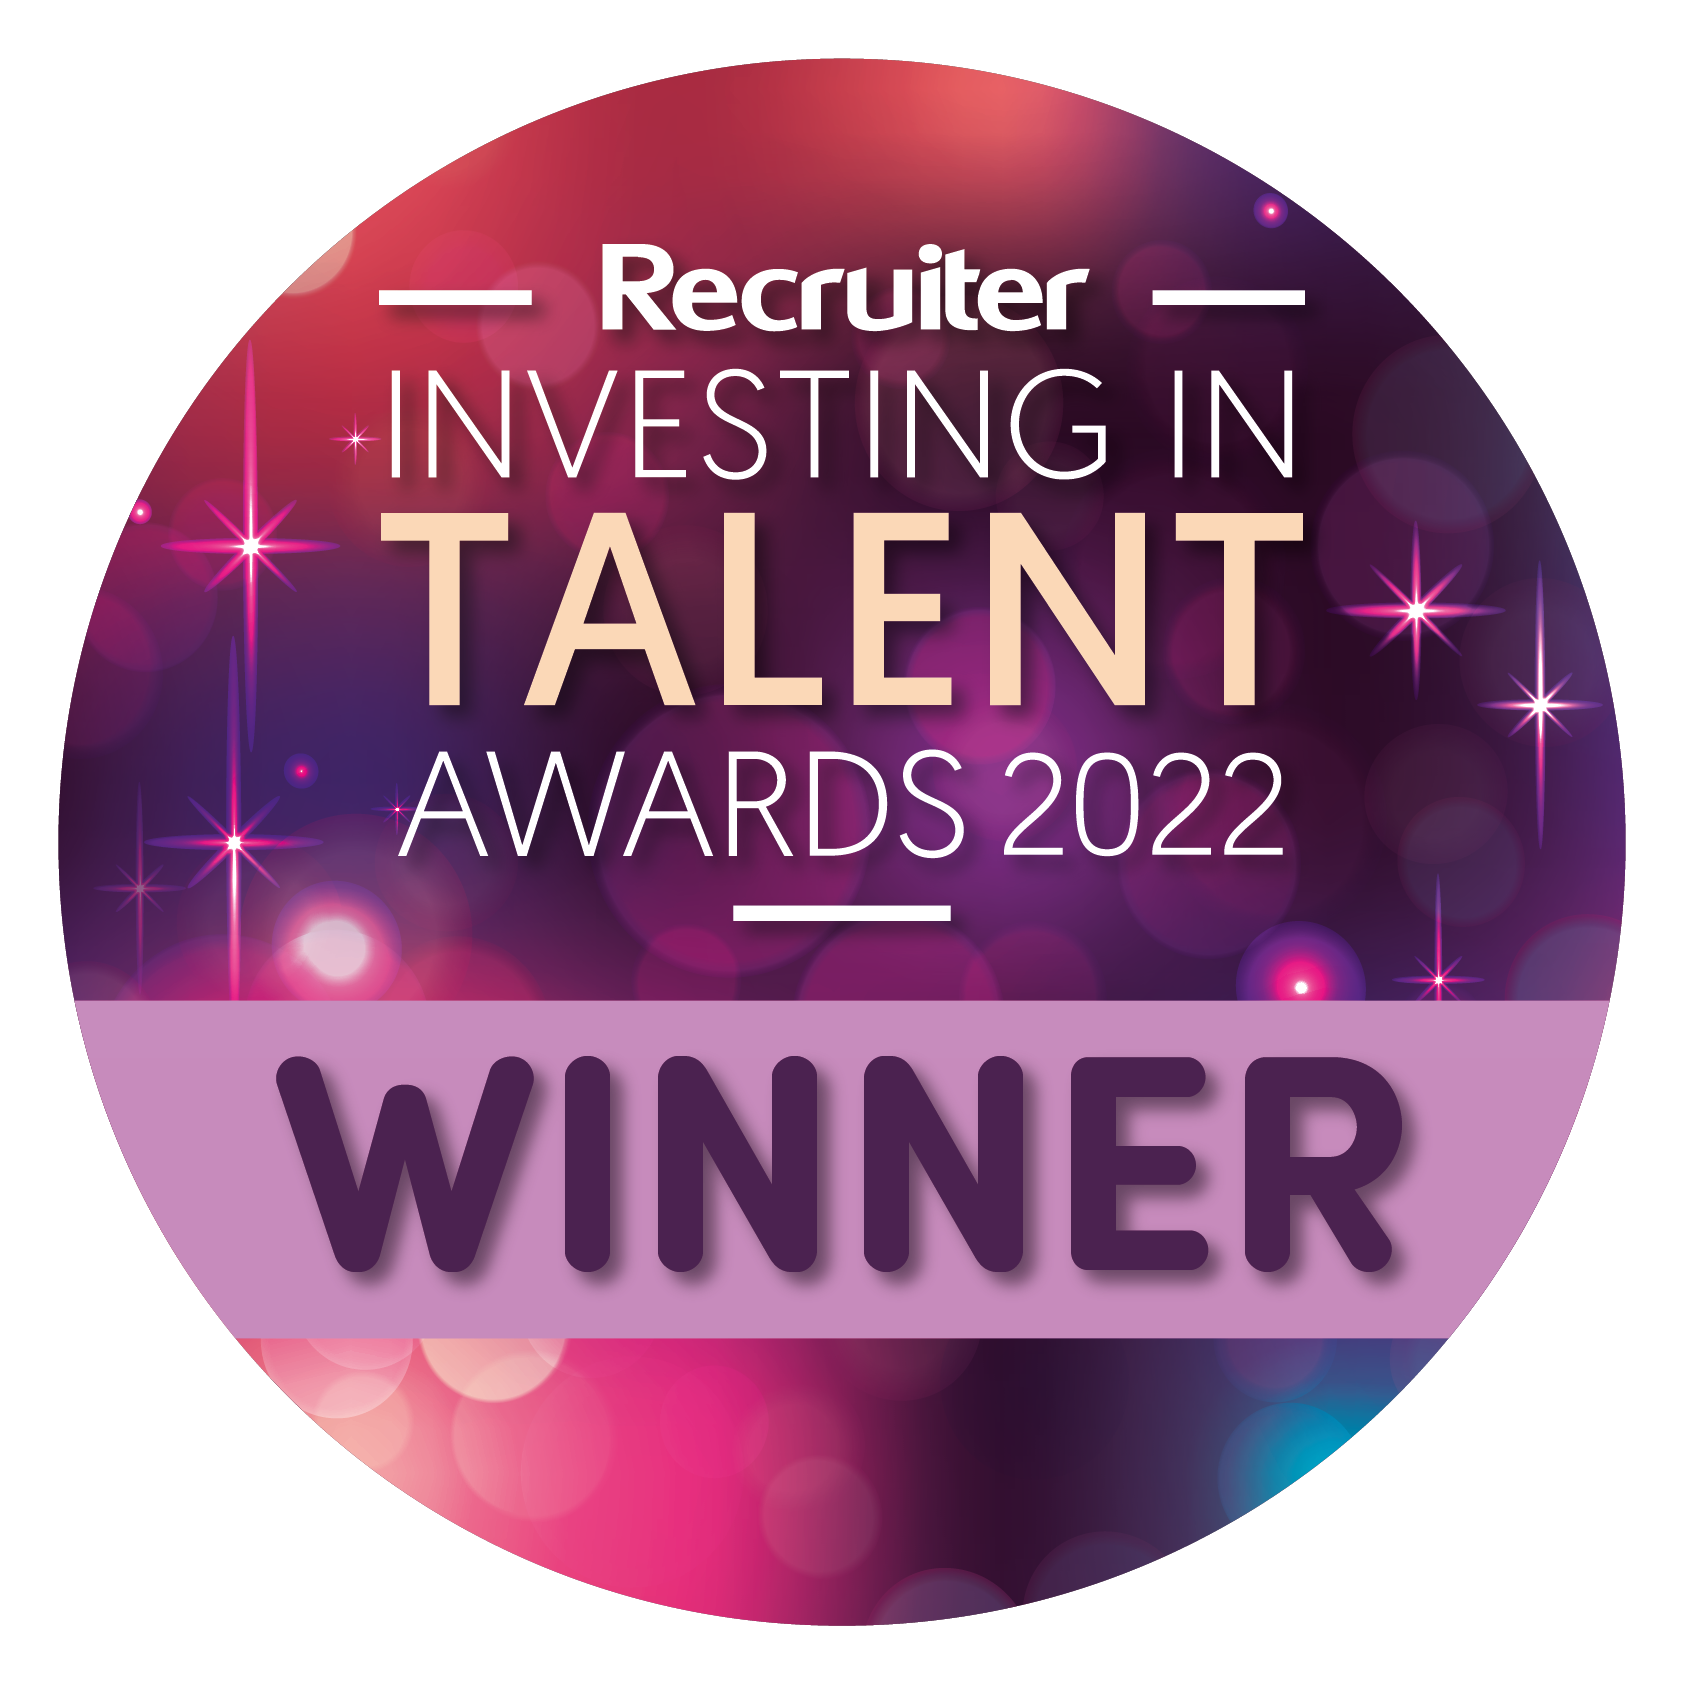 Best Recruitment Company to Work For (Large)